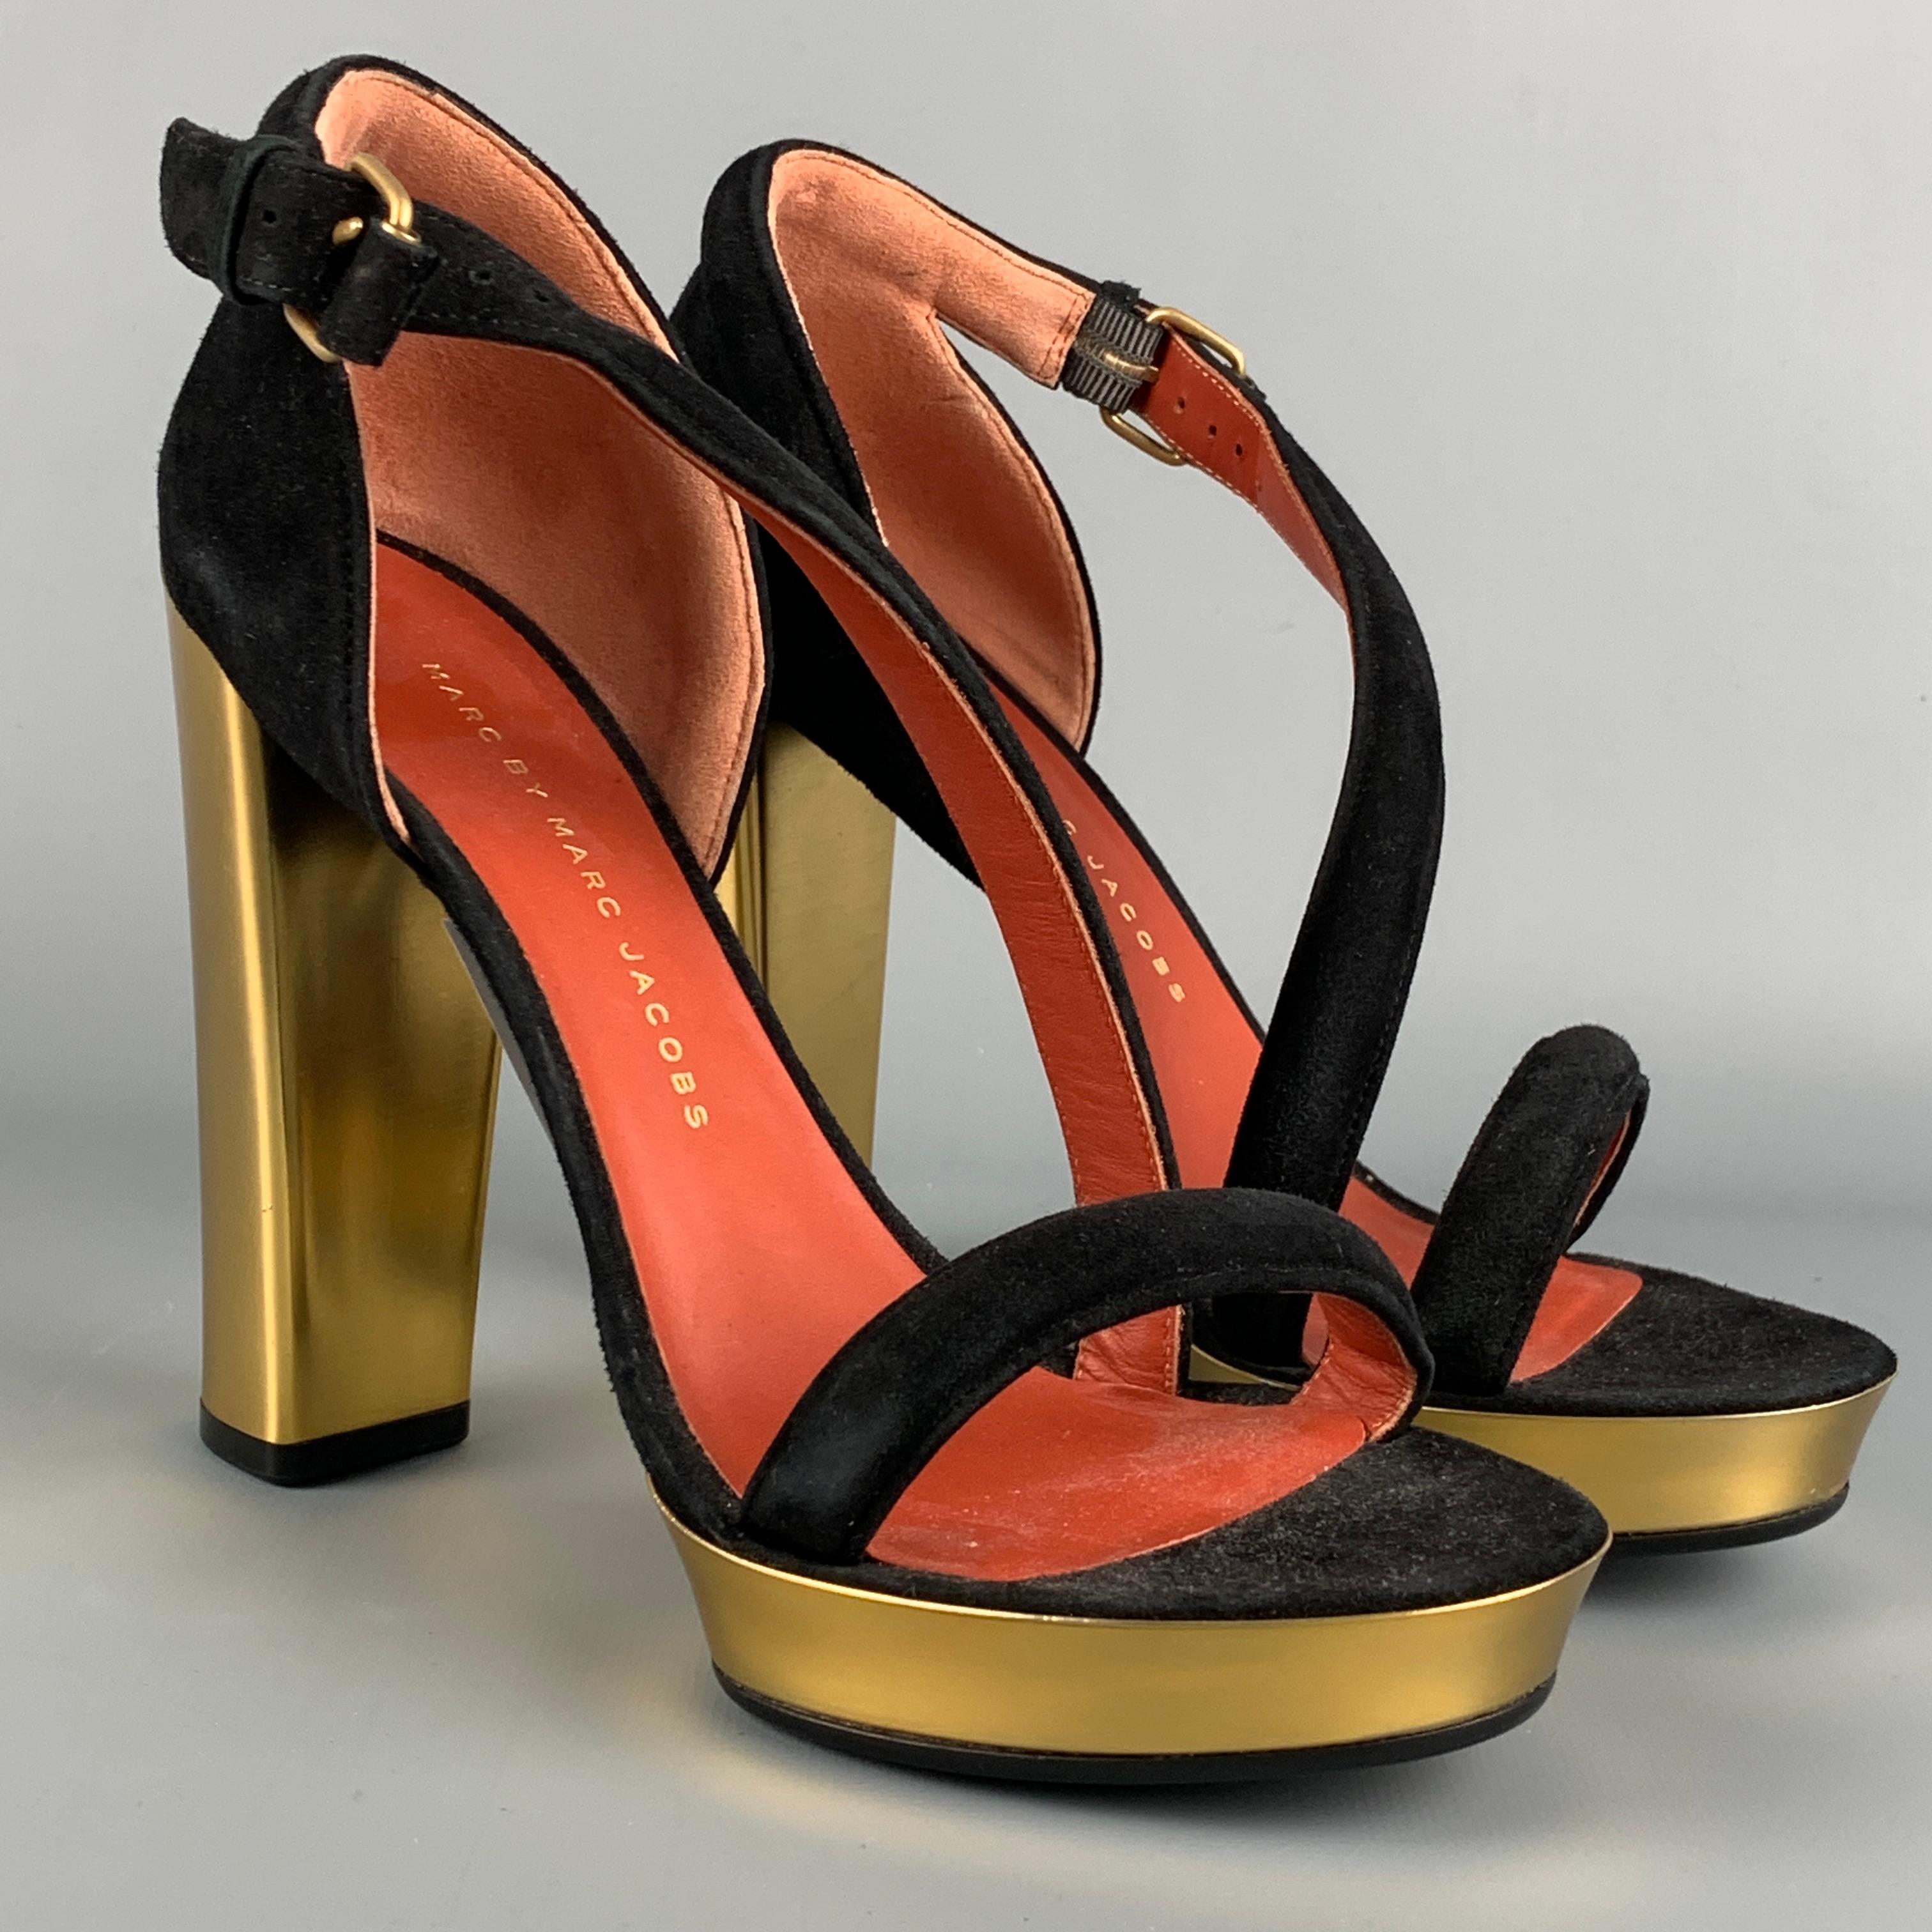 MARC by MARC JACOBS pumps comes in a black & gold leather featuring a open toe, chunky heel, and a strap buckle closure. Made in Italy. 

Very Good Pre-Owned Condition.
Marked: 36

Measurements:

Heel: 4.5 in.
Platform: 1 in. 